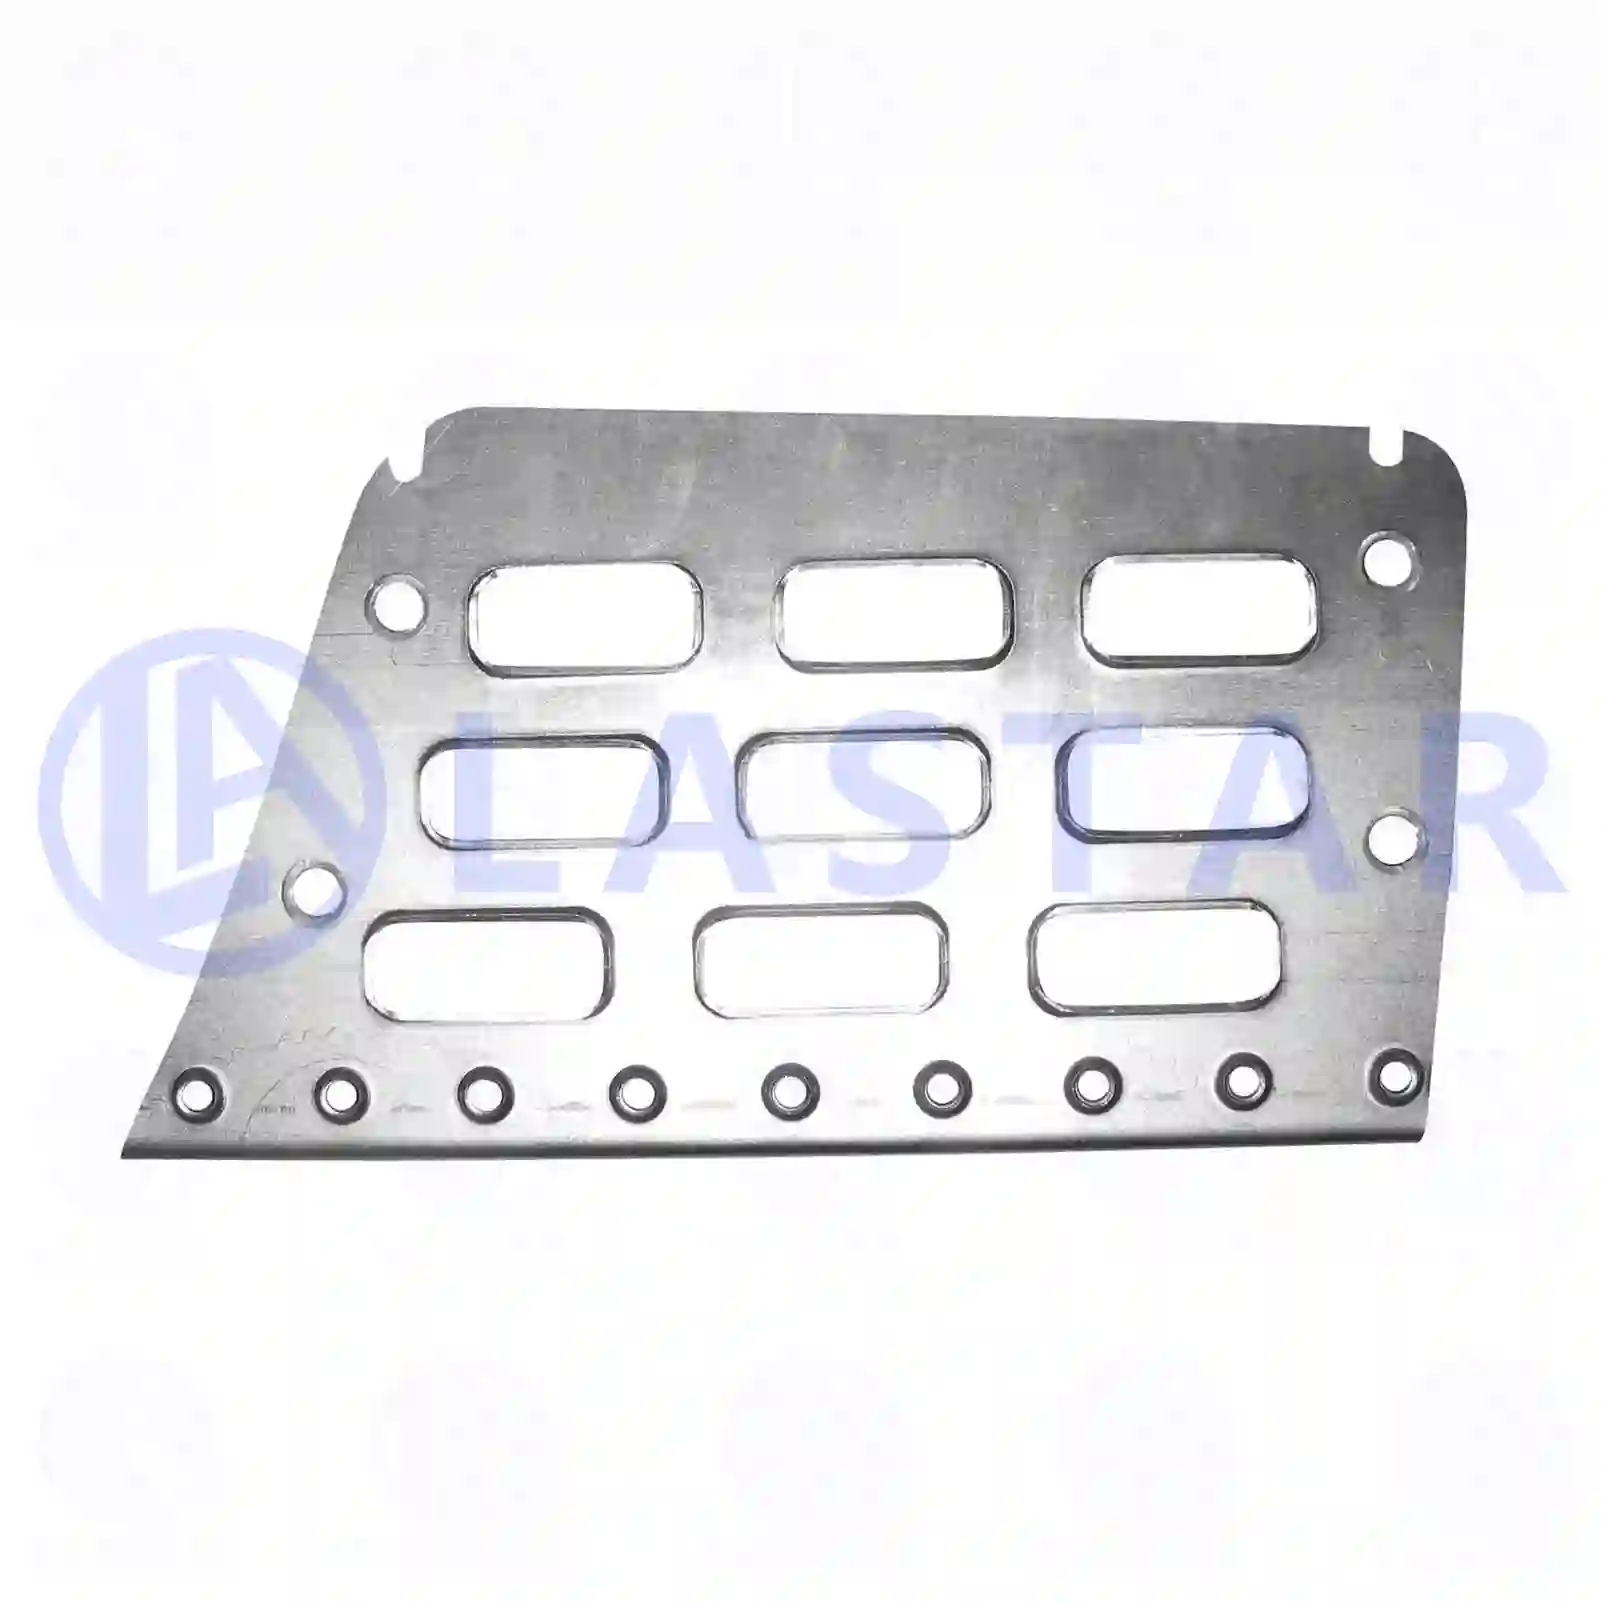 Step, right, 77721025, 20360789, ZG61163-0008 ||  77721025 Lastar Spare Part | Truck Spare Parts, Auotomotive Spare Parts Step, right, 77721025, 20360789, ZG61163-0008 ||  77721025 Lastar Spare Part | Truck Spare Parts, Auotomotive Spare Parts